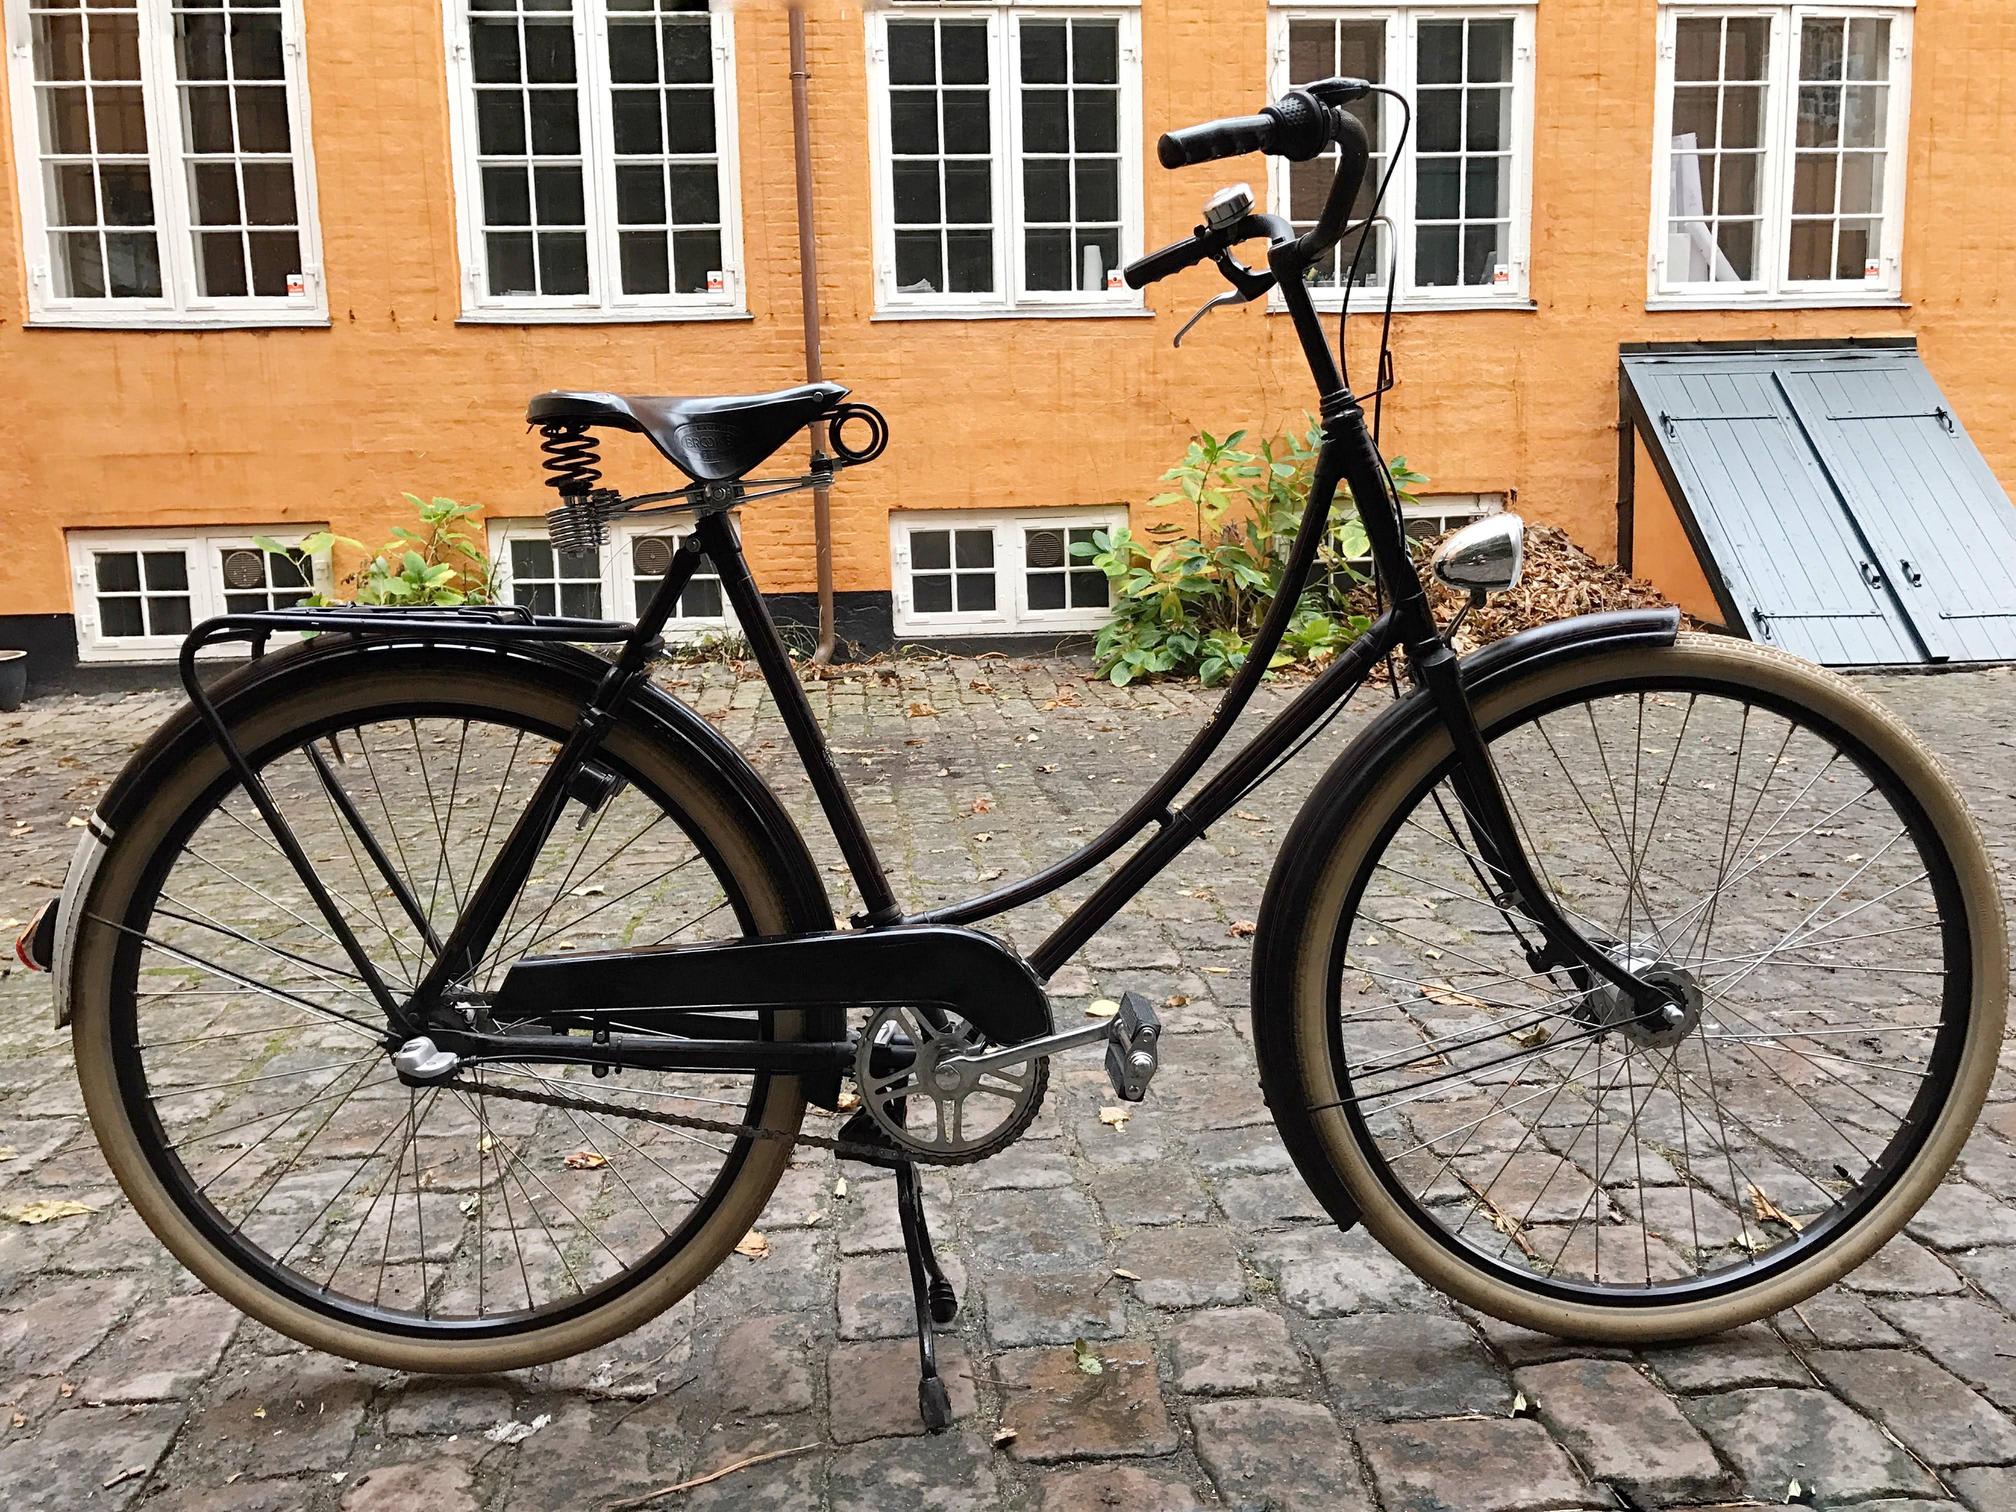 Variants for Old Bicycle.